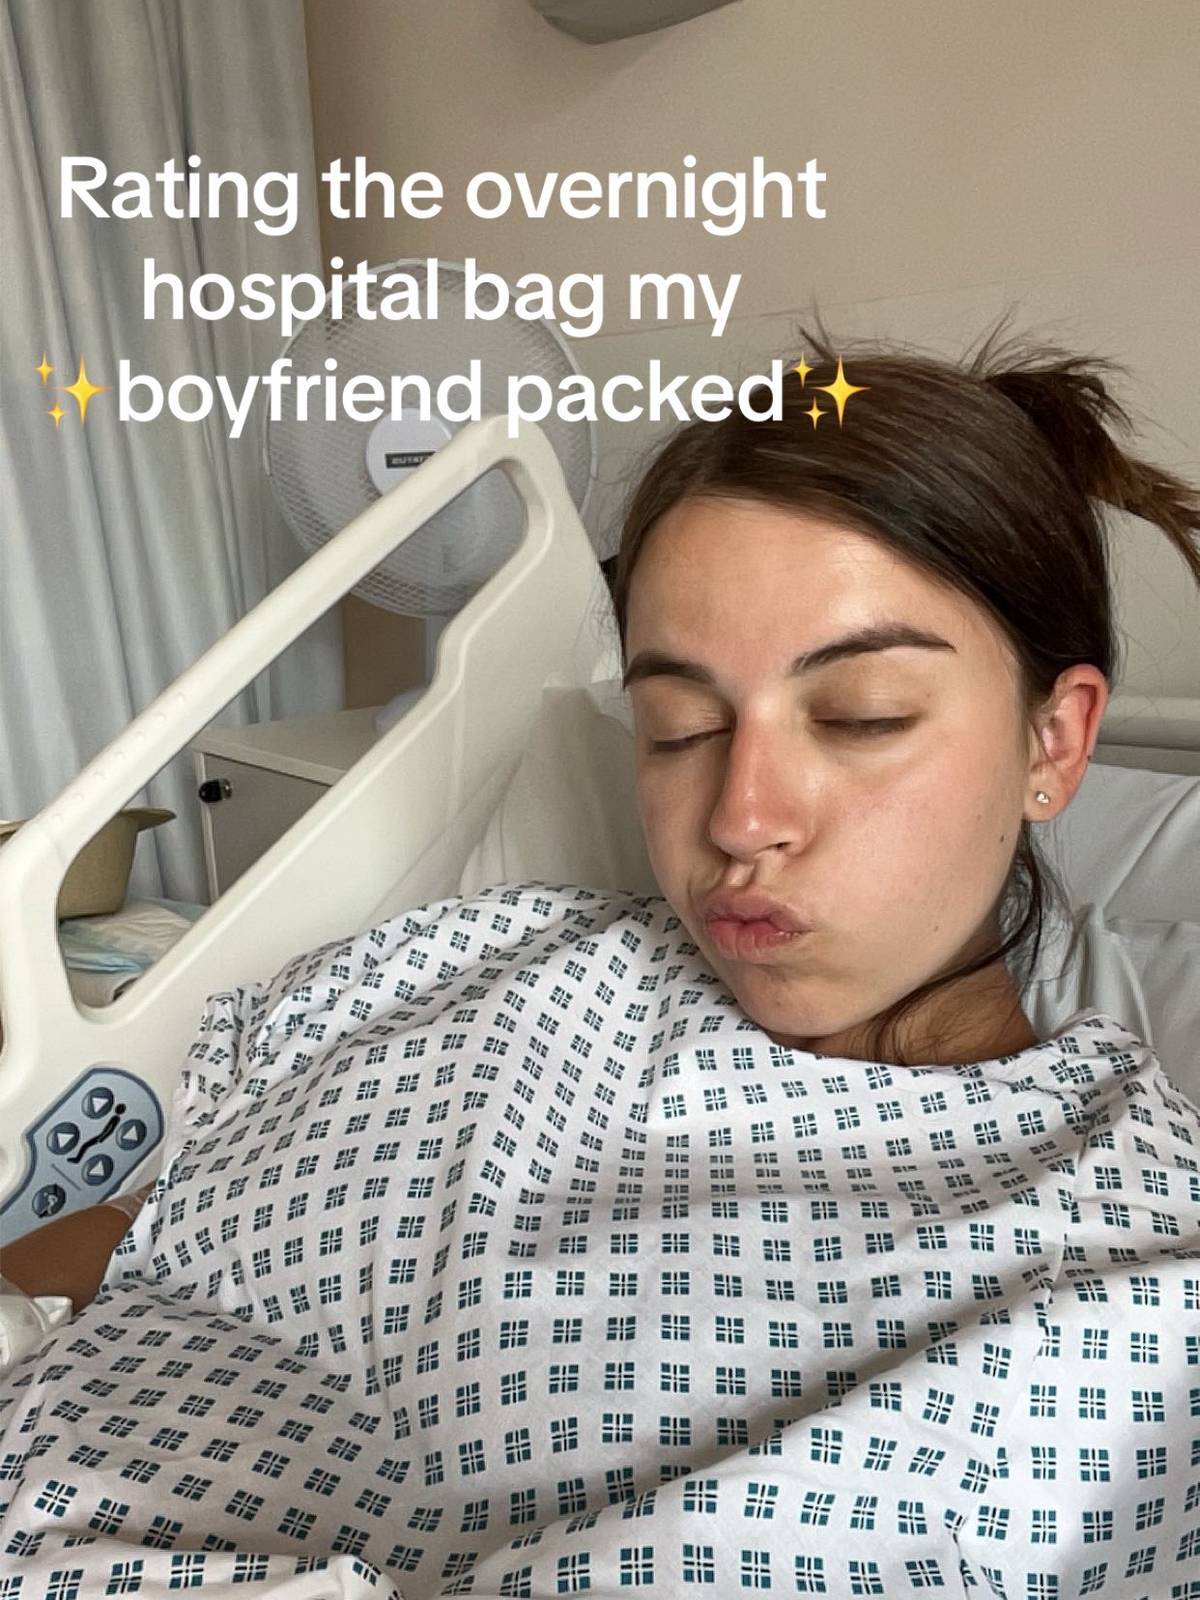 Liv shared the content of her hospital bag her partner packed